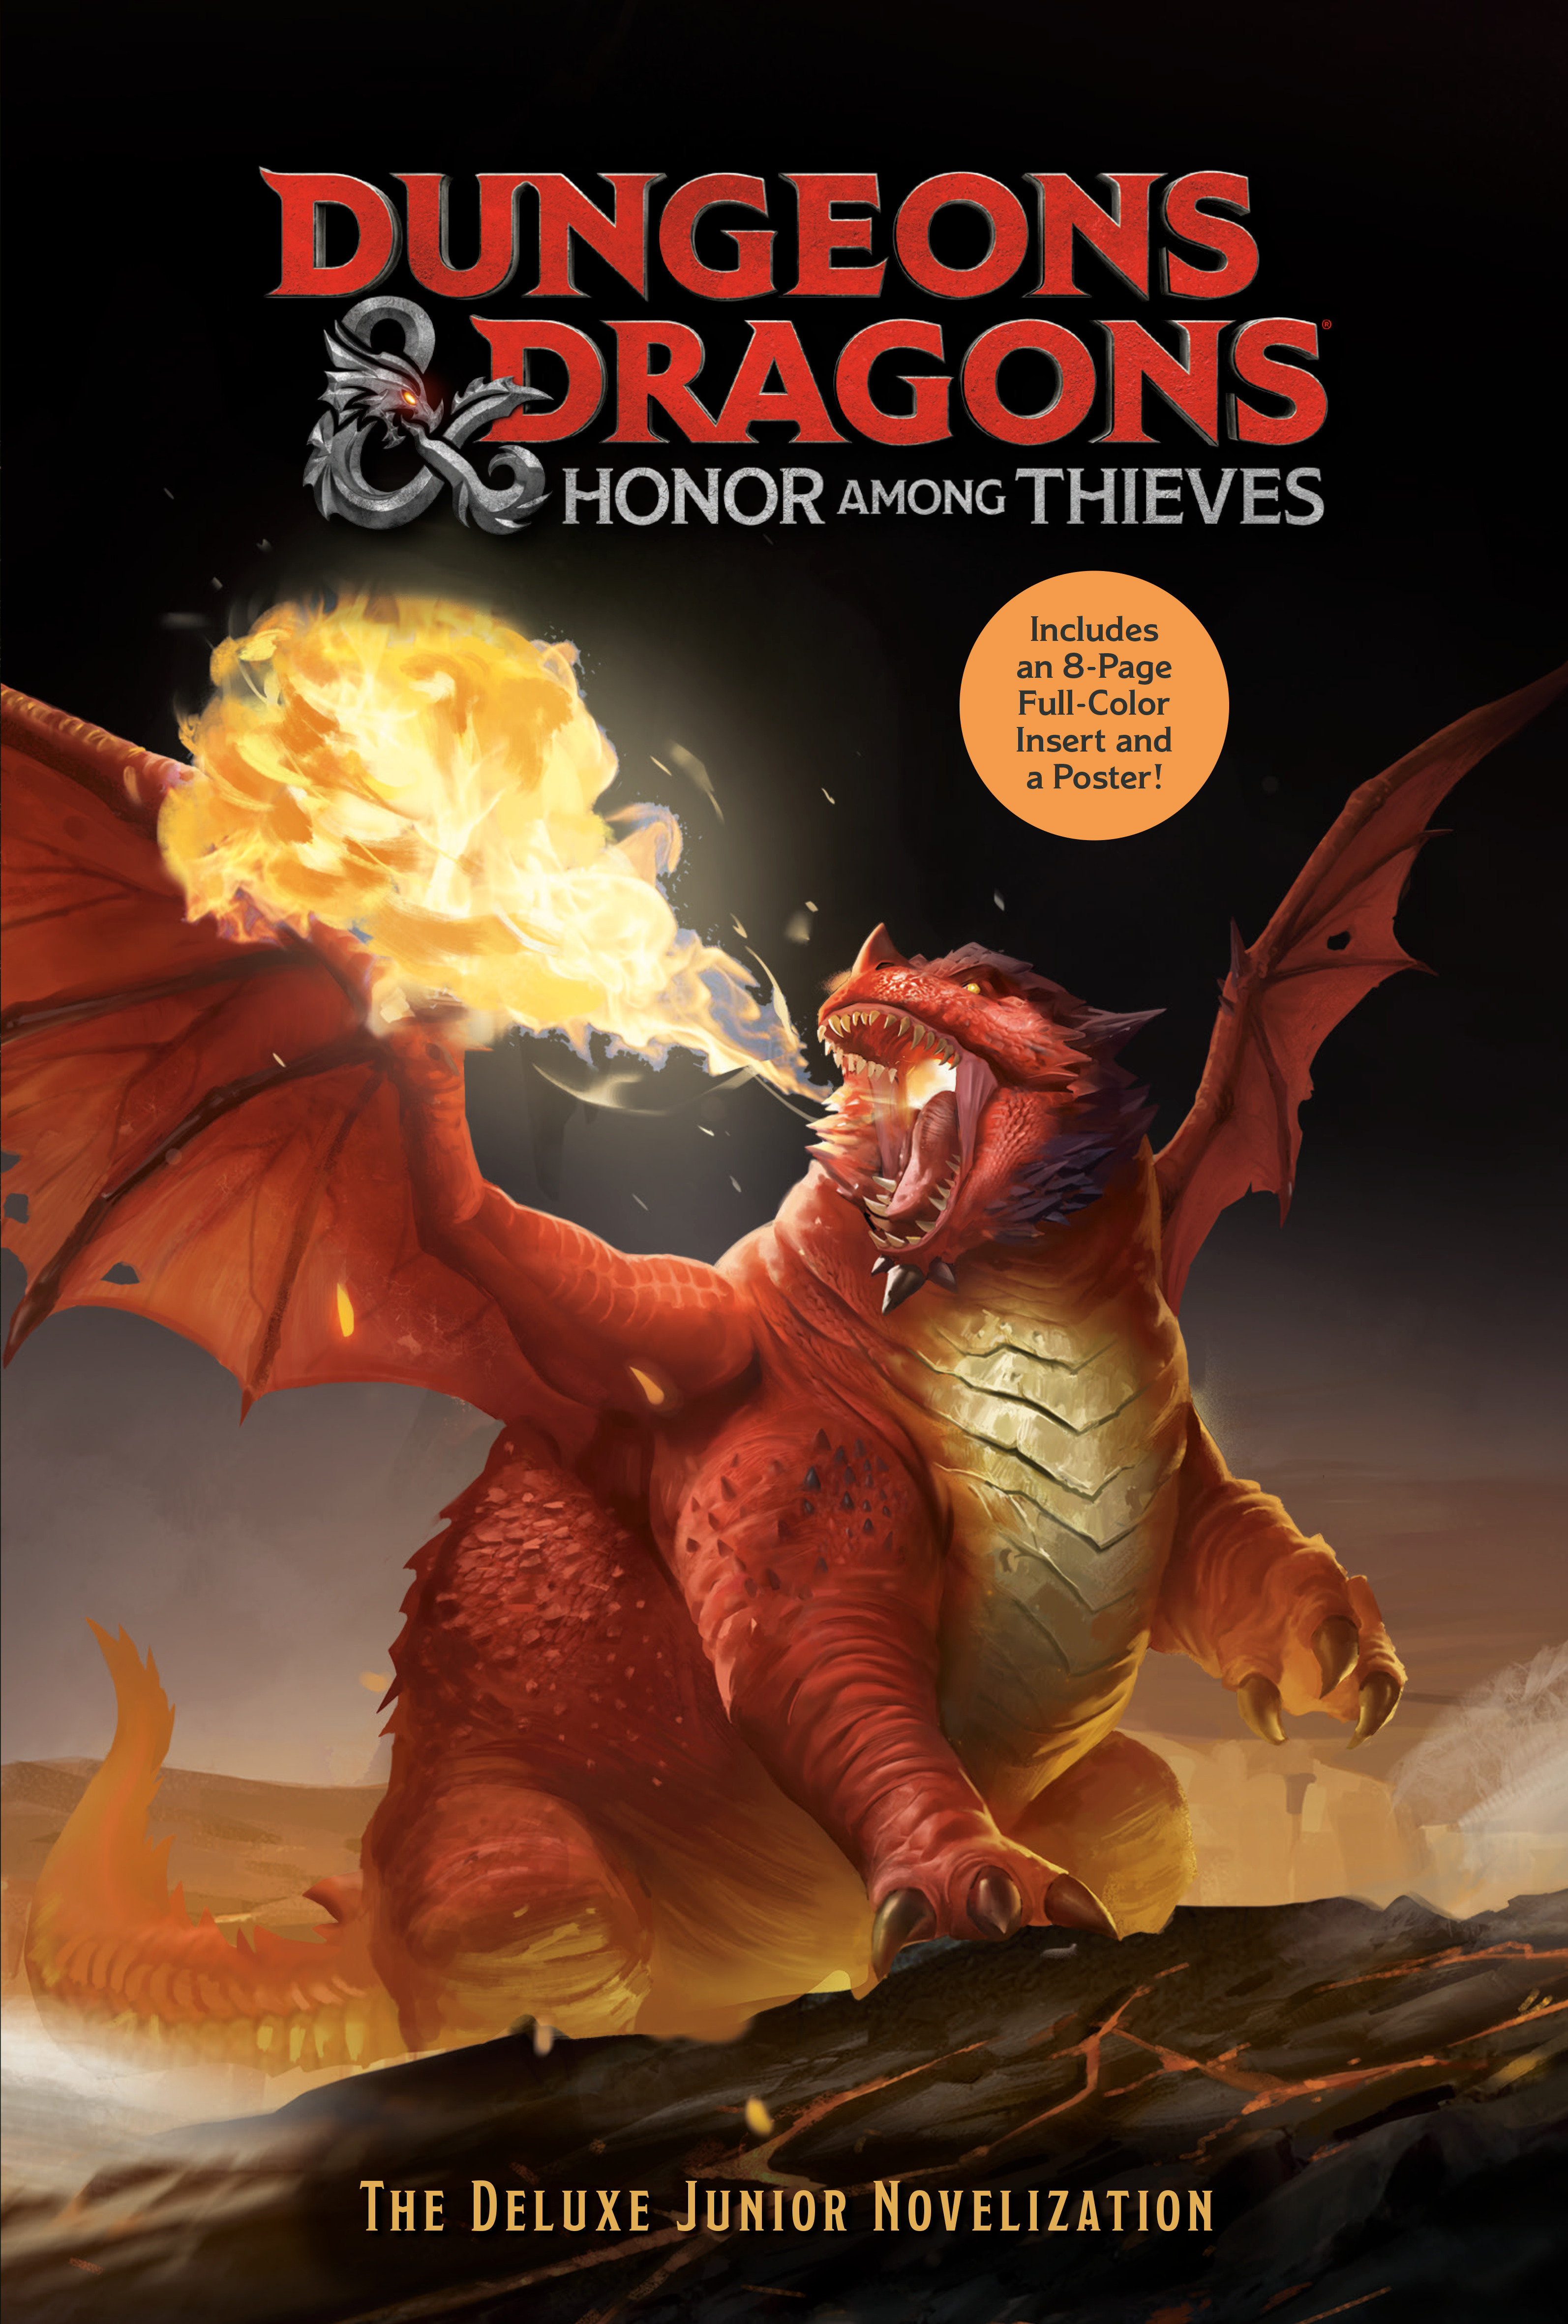 Dungeons & Dragons Honor Among Thieves The Deluxe Junior Novelization (Dungeons & Dragons Honor Among Thieves)